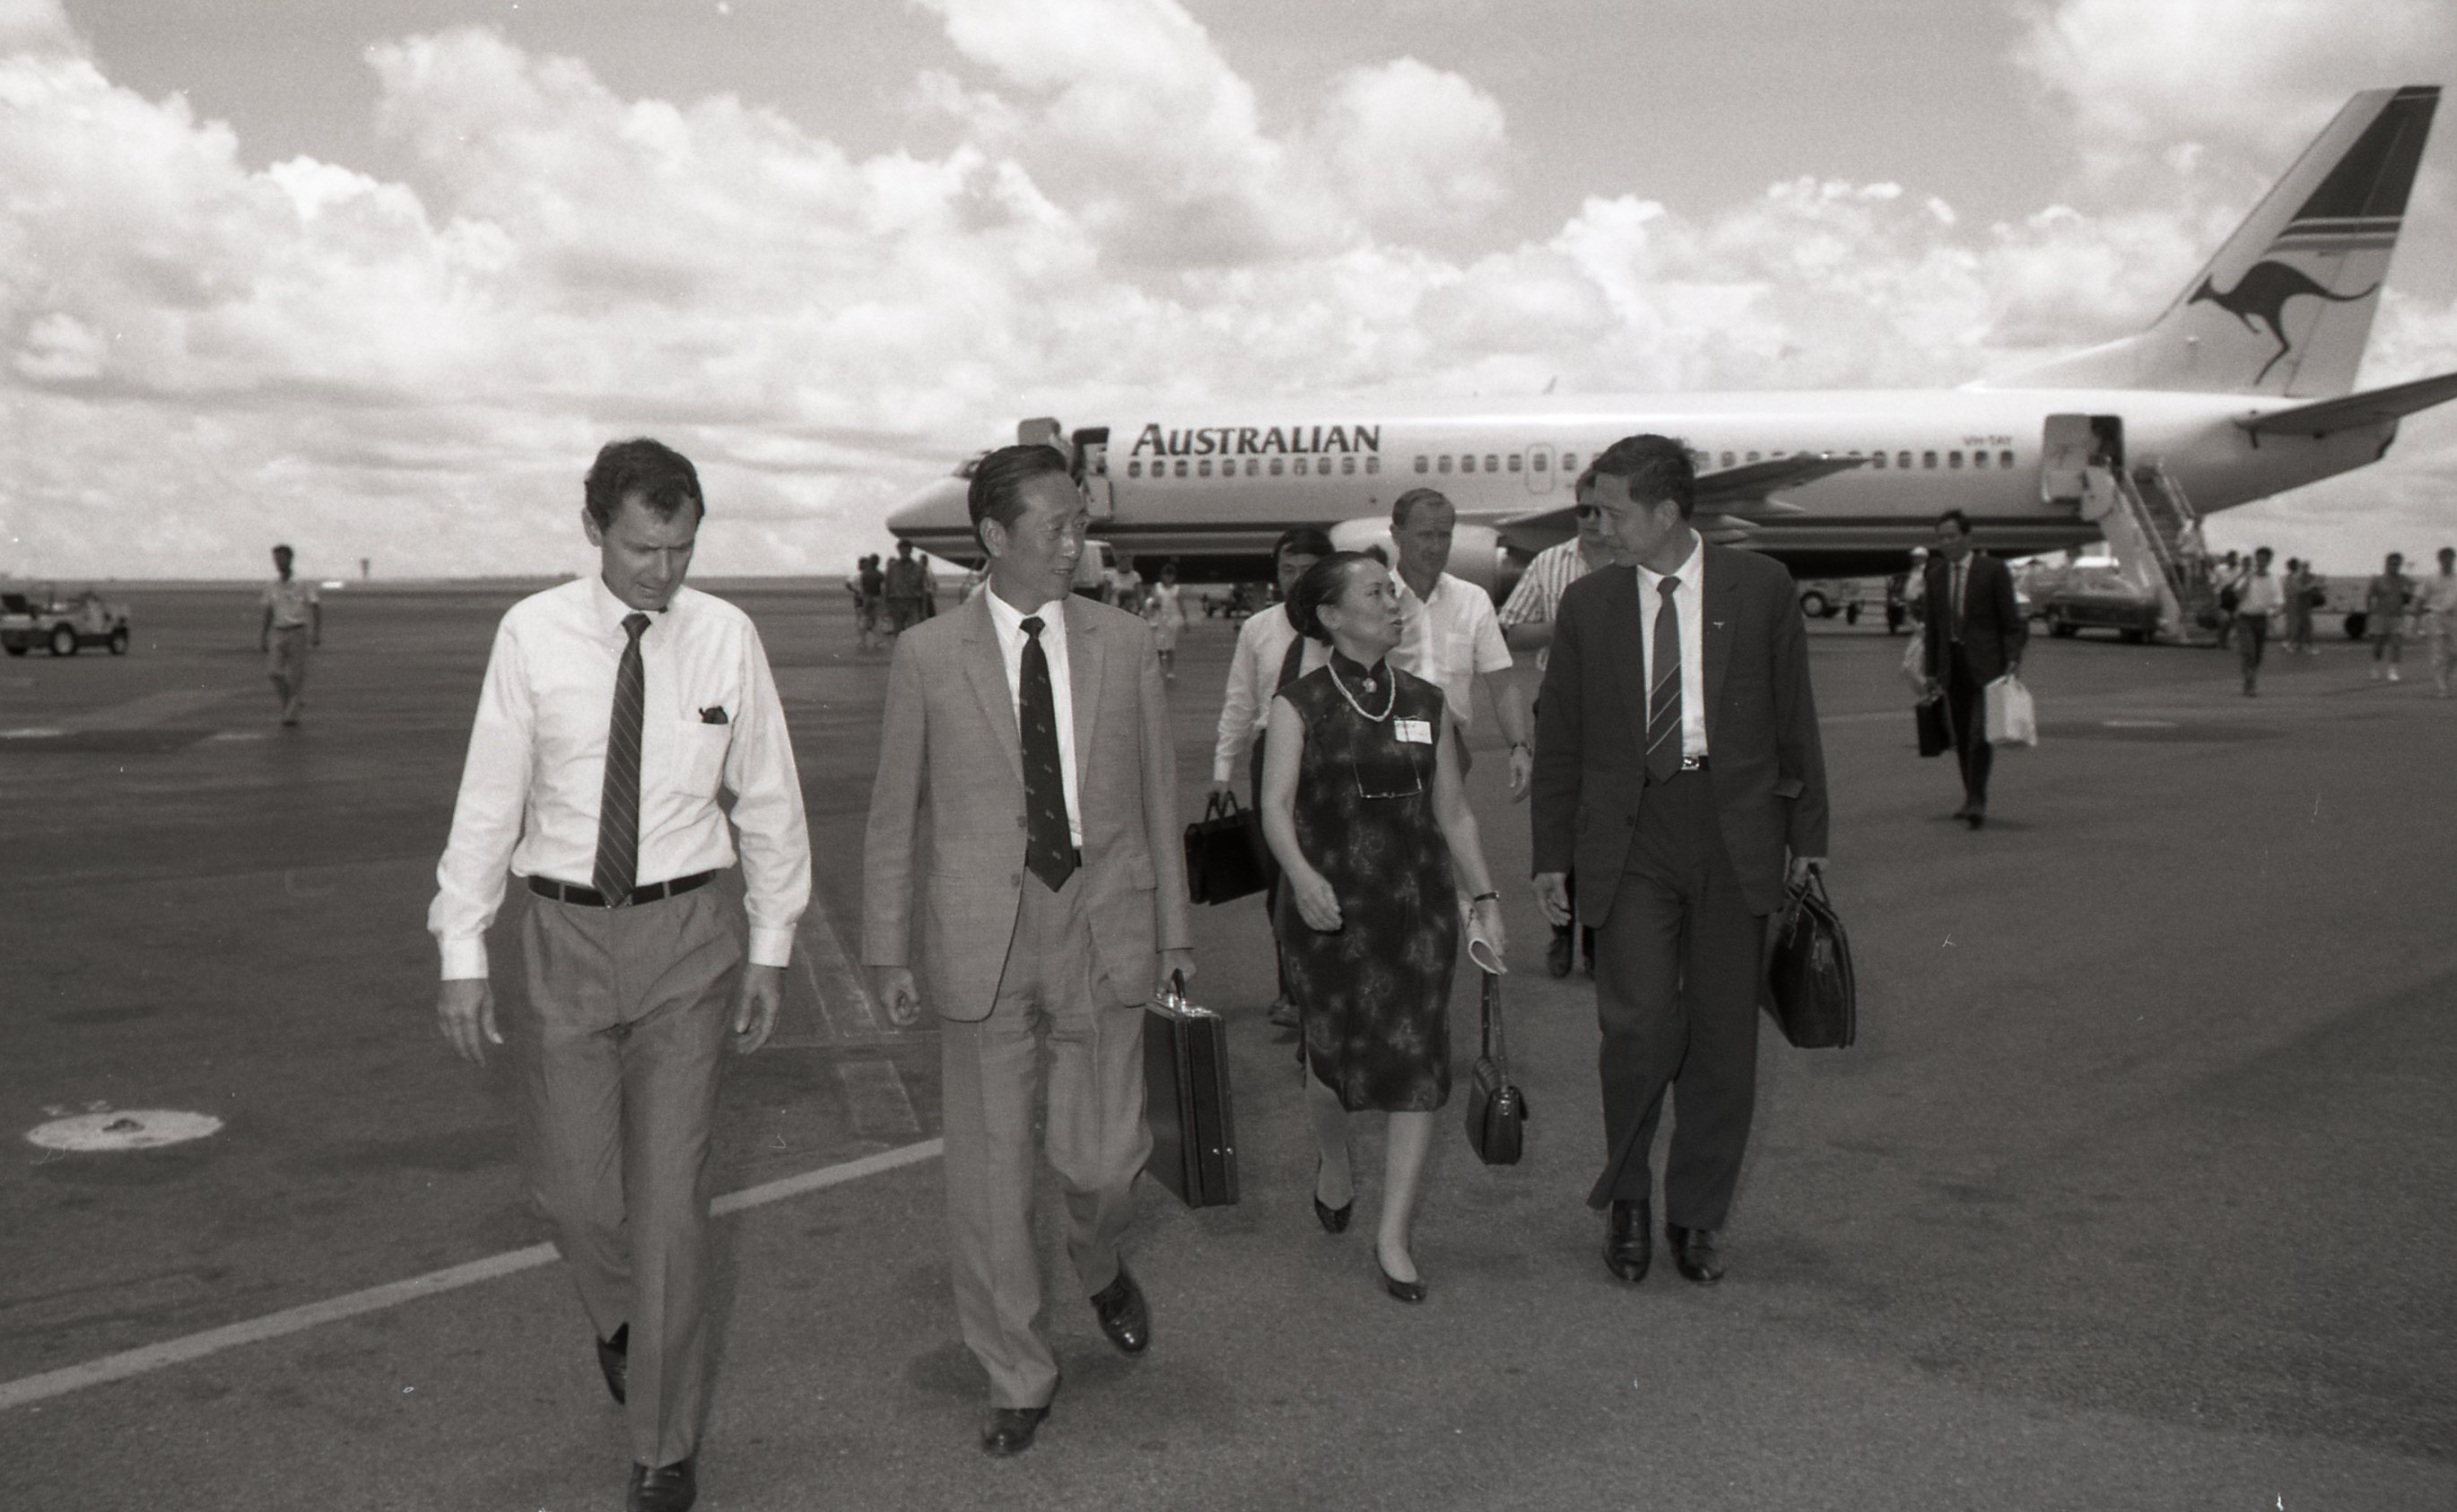 Chief Minister Marshall Perron meets Mr Zhang Haorou, Governor of Sichuan Province, Darwin Airport, 22 February 1989<br />Image courtesy of Library & Archives NT,  Department of the Chief Minister, NTRS 3823 P1, Box 11, BW2796, Image 6a